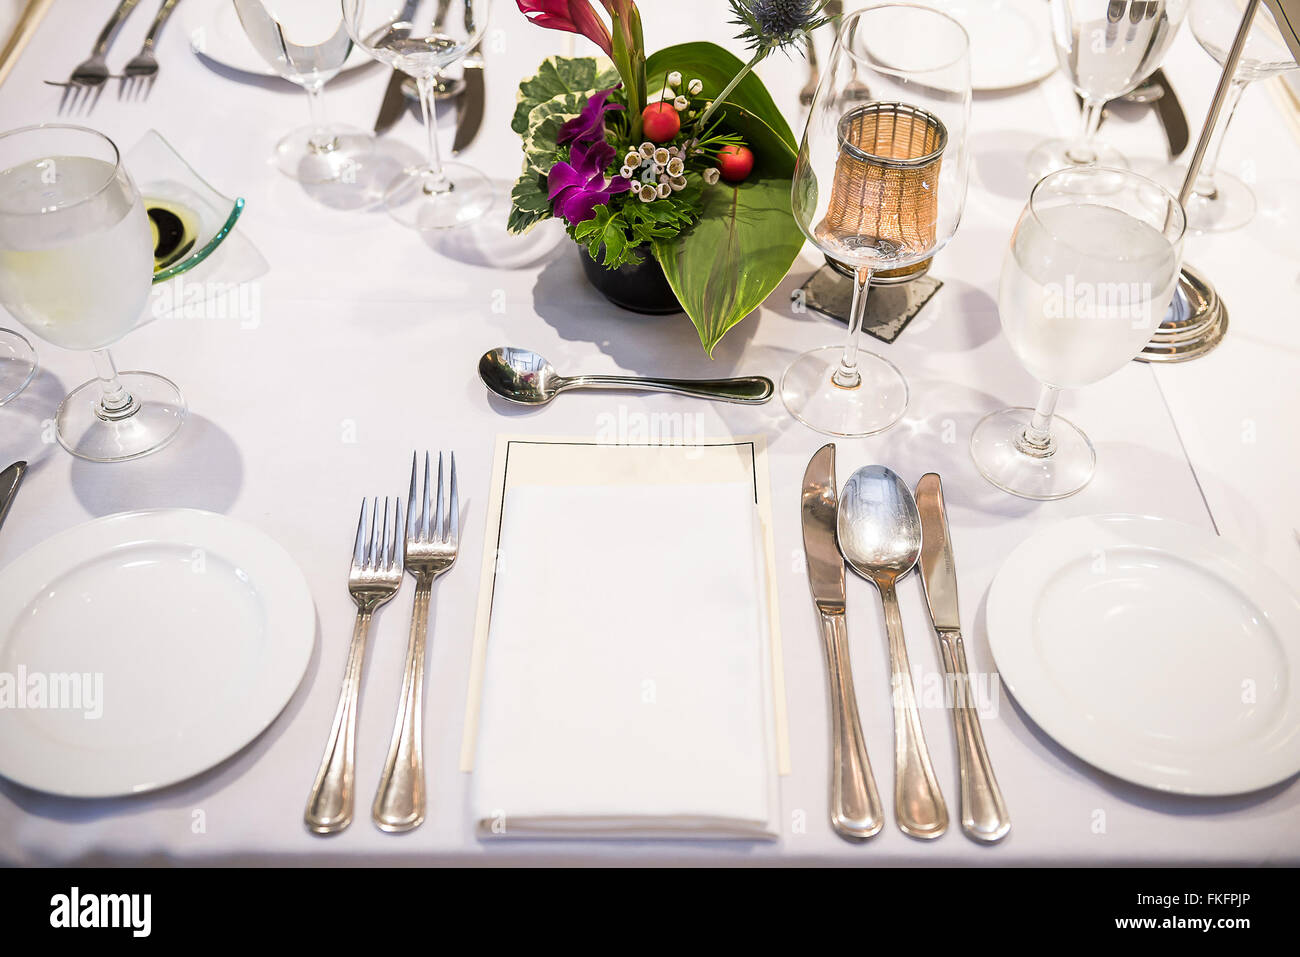 Table set up with cutlery for meal. Stock Photo